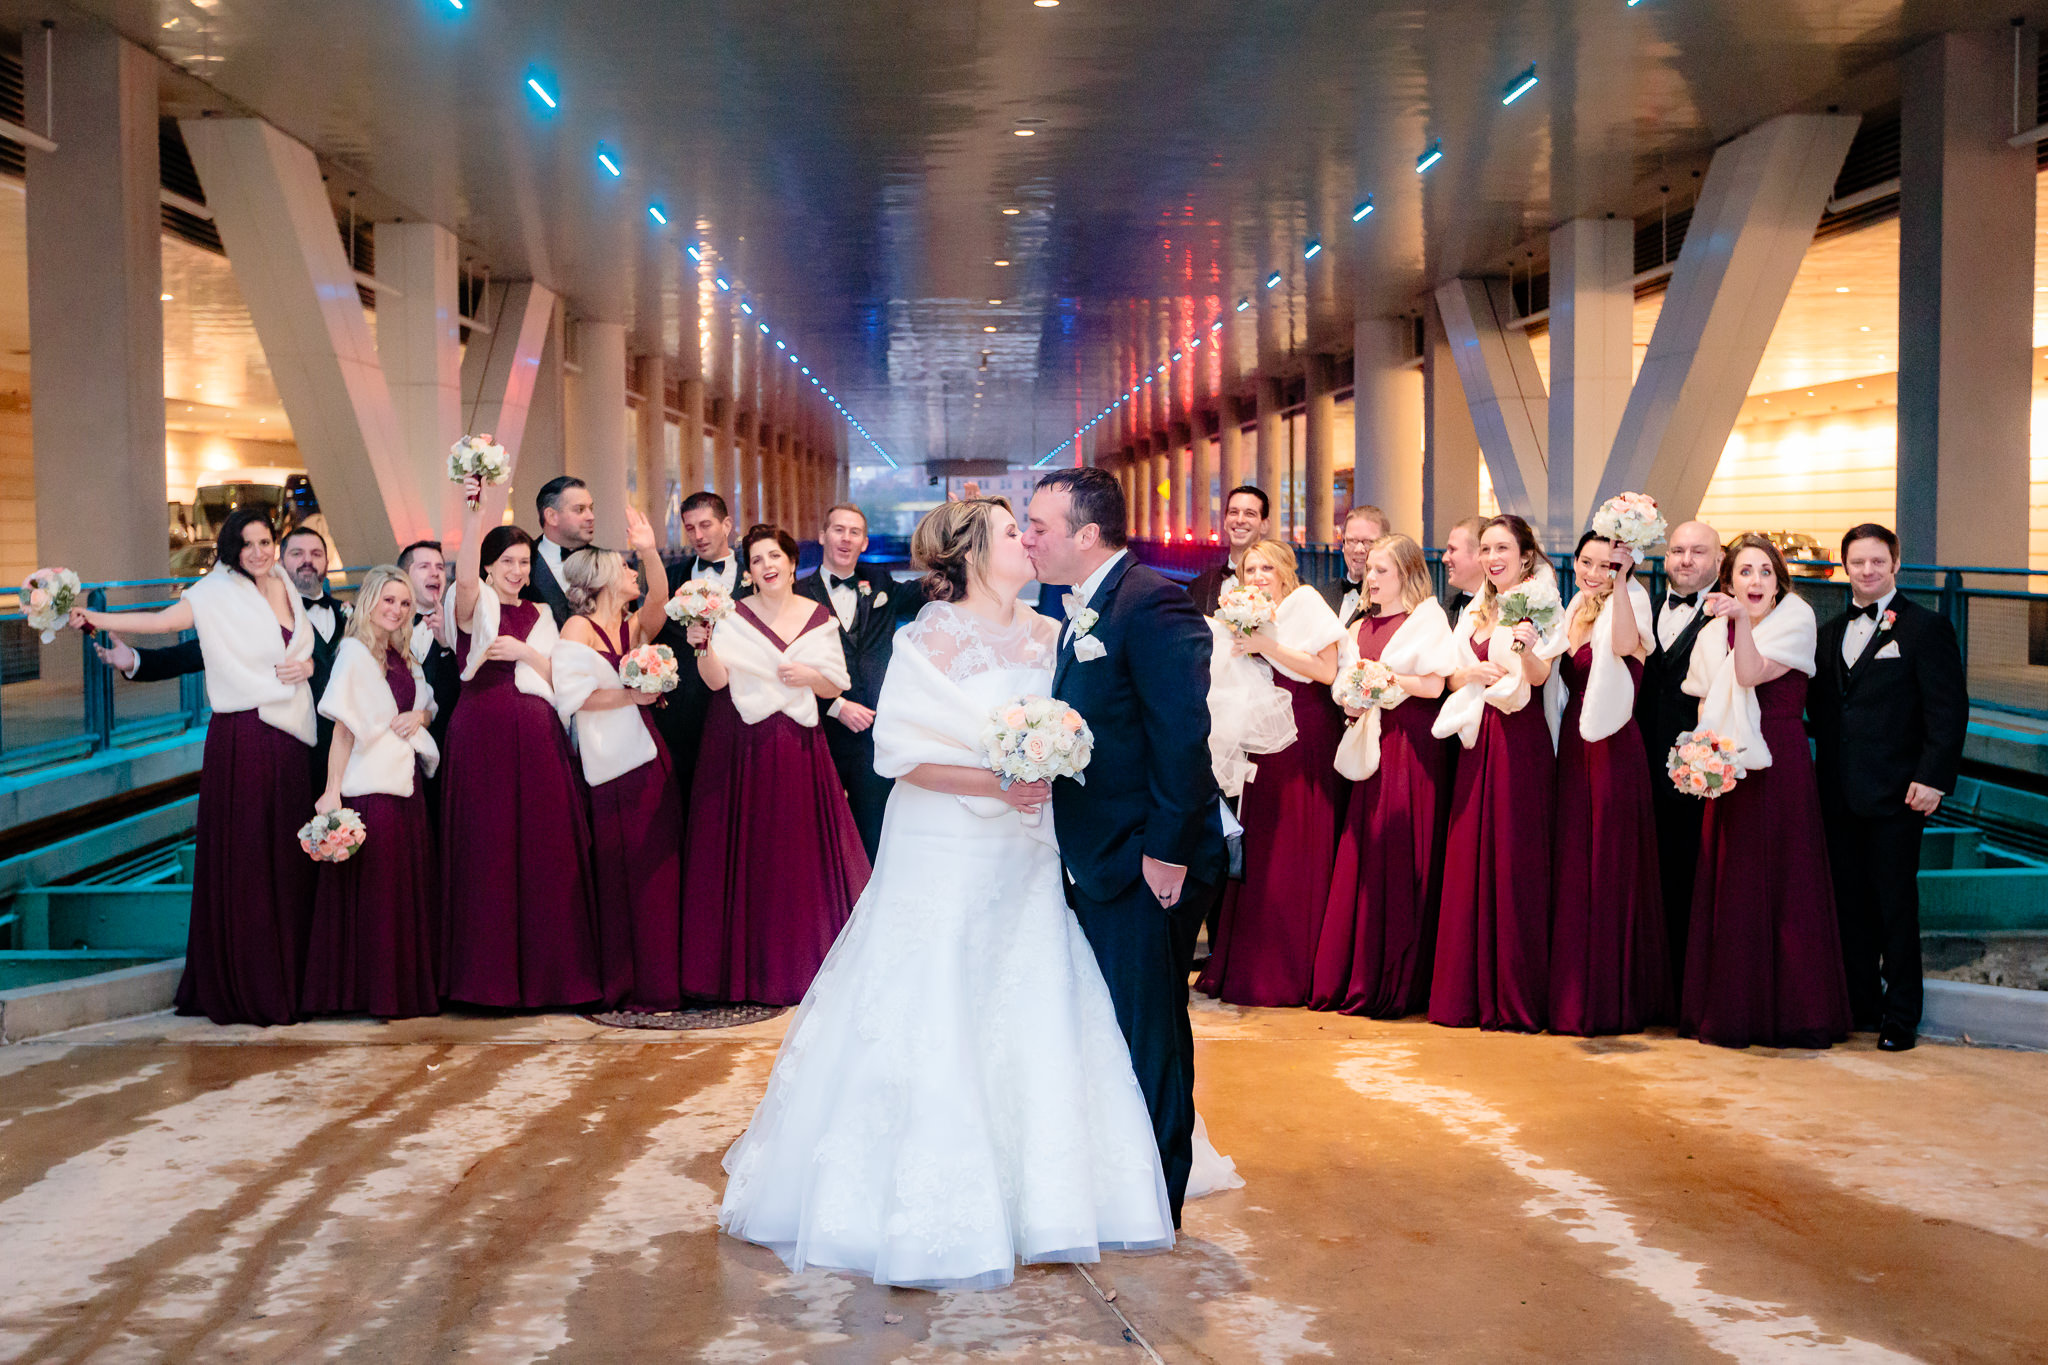 Newlyweds kiss as their bridal party cheers at the David L. Lawrence Convention Center in Pittsburgh